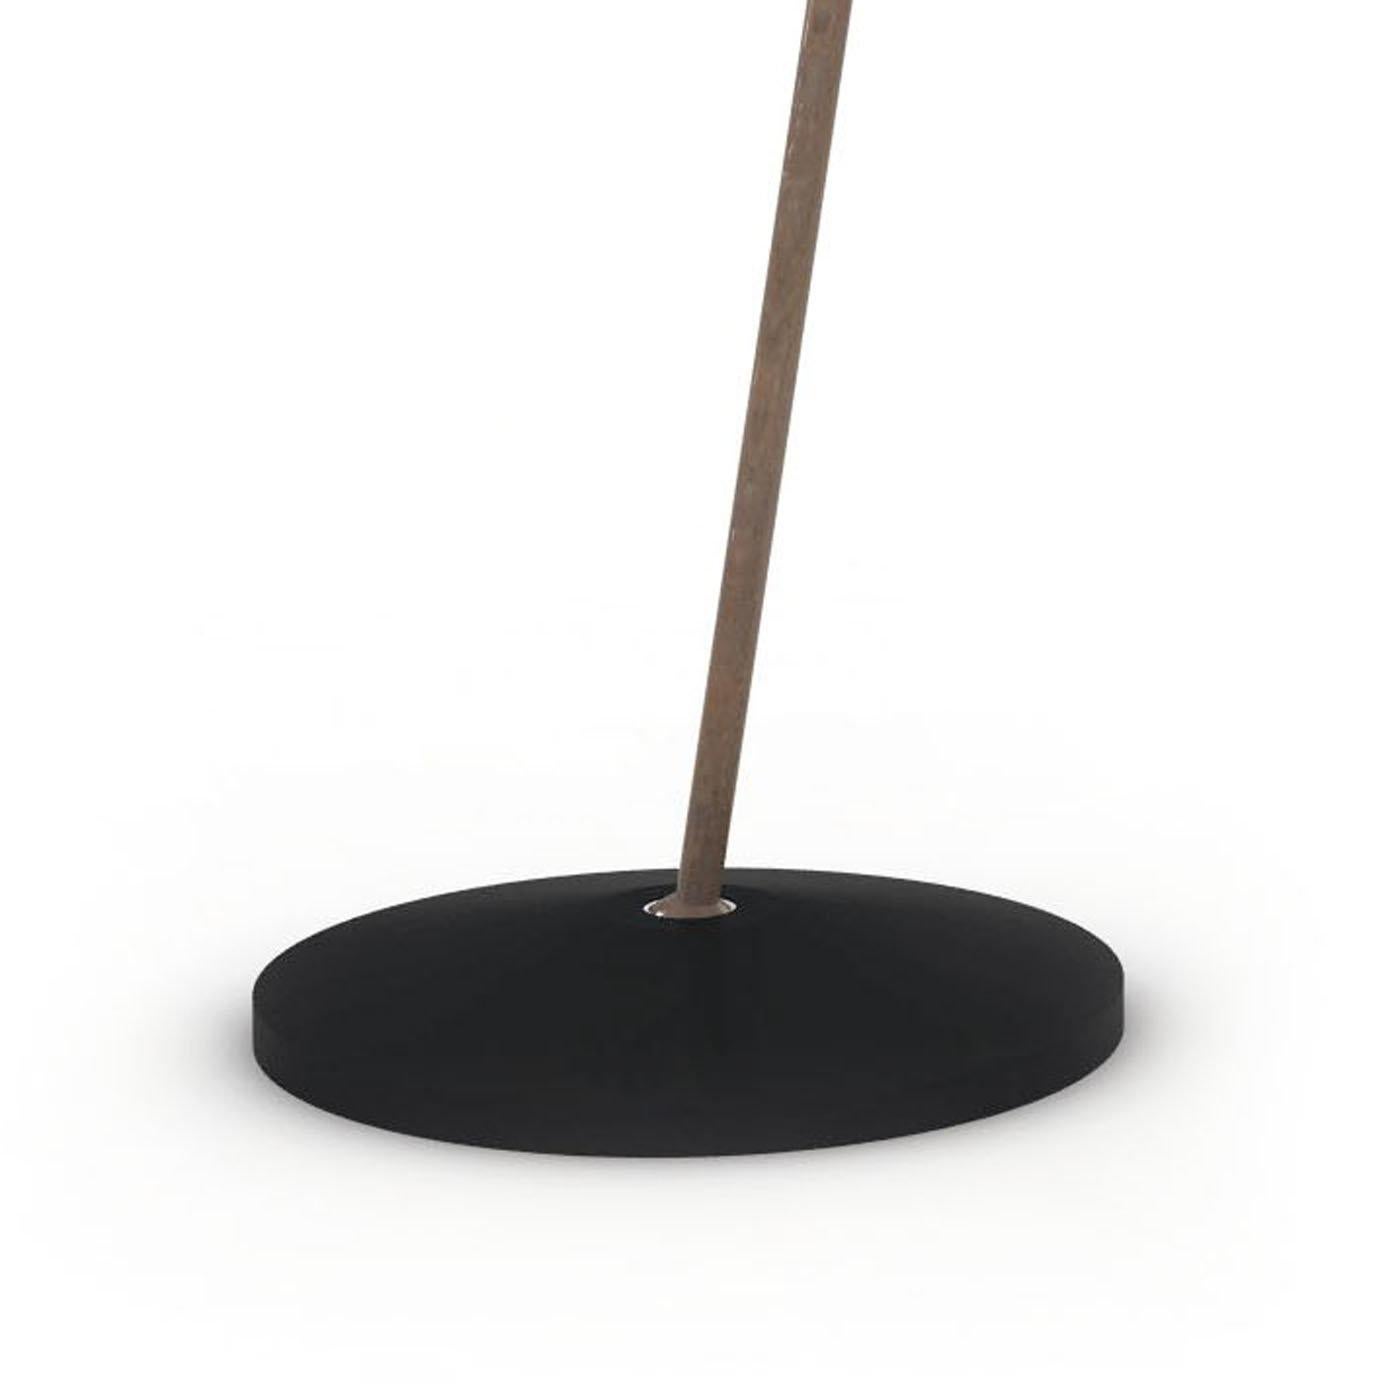 A modern interpretation of the iconic gooseneck lamp, this desk lamp features a round base and shade in metal with a glossy black finish. The shaft, curved to accomodate the large opening of the shade, is in brass with an elegant bronze finish that